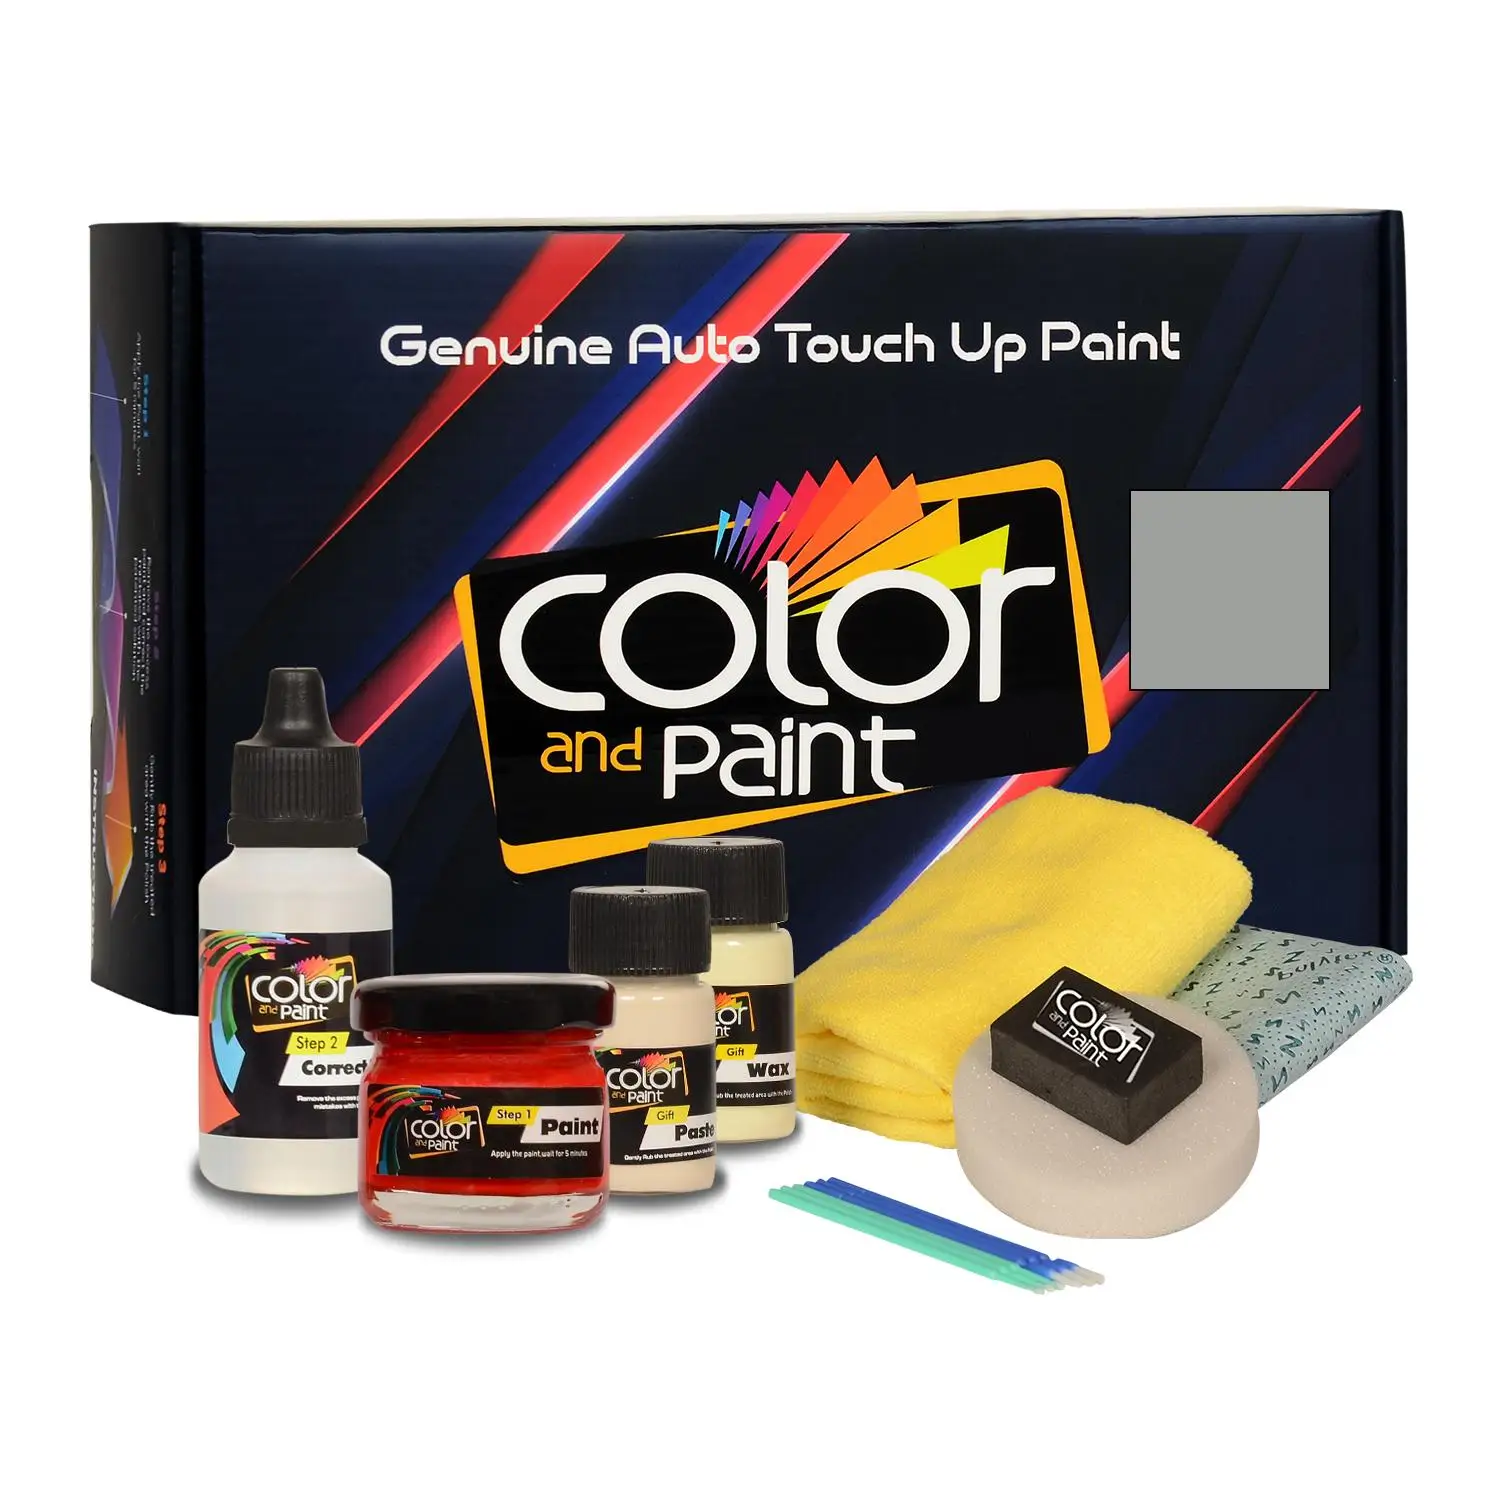 

Color and Paint compatible with Maxus Automotive Touch Up Paint - JI GUANG YIN BU-no-code-basic Care